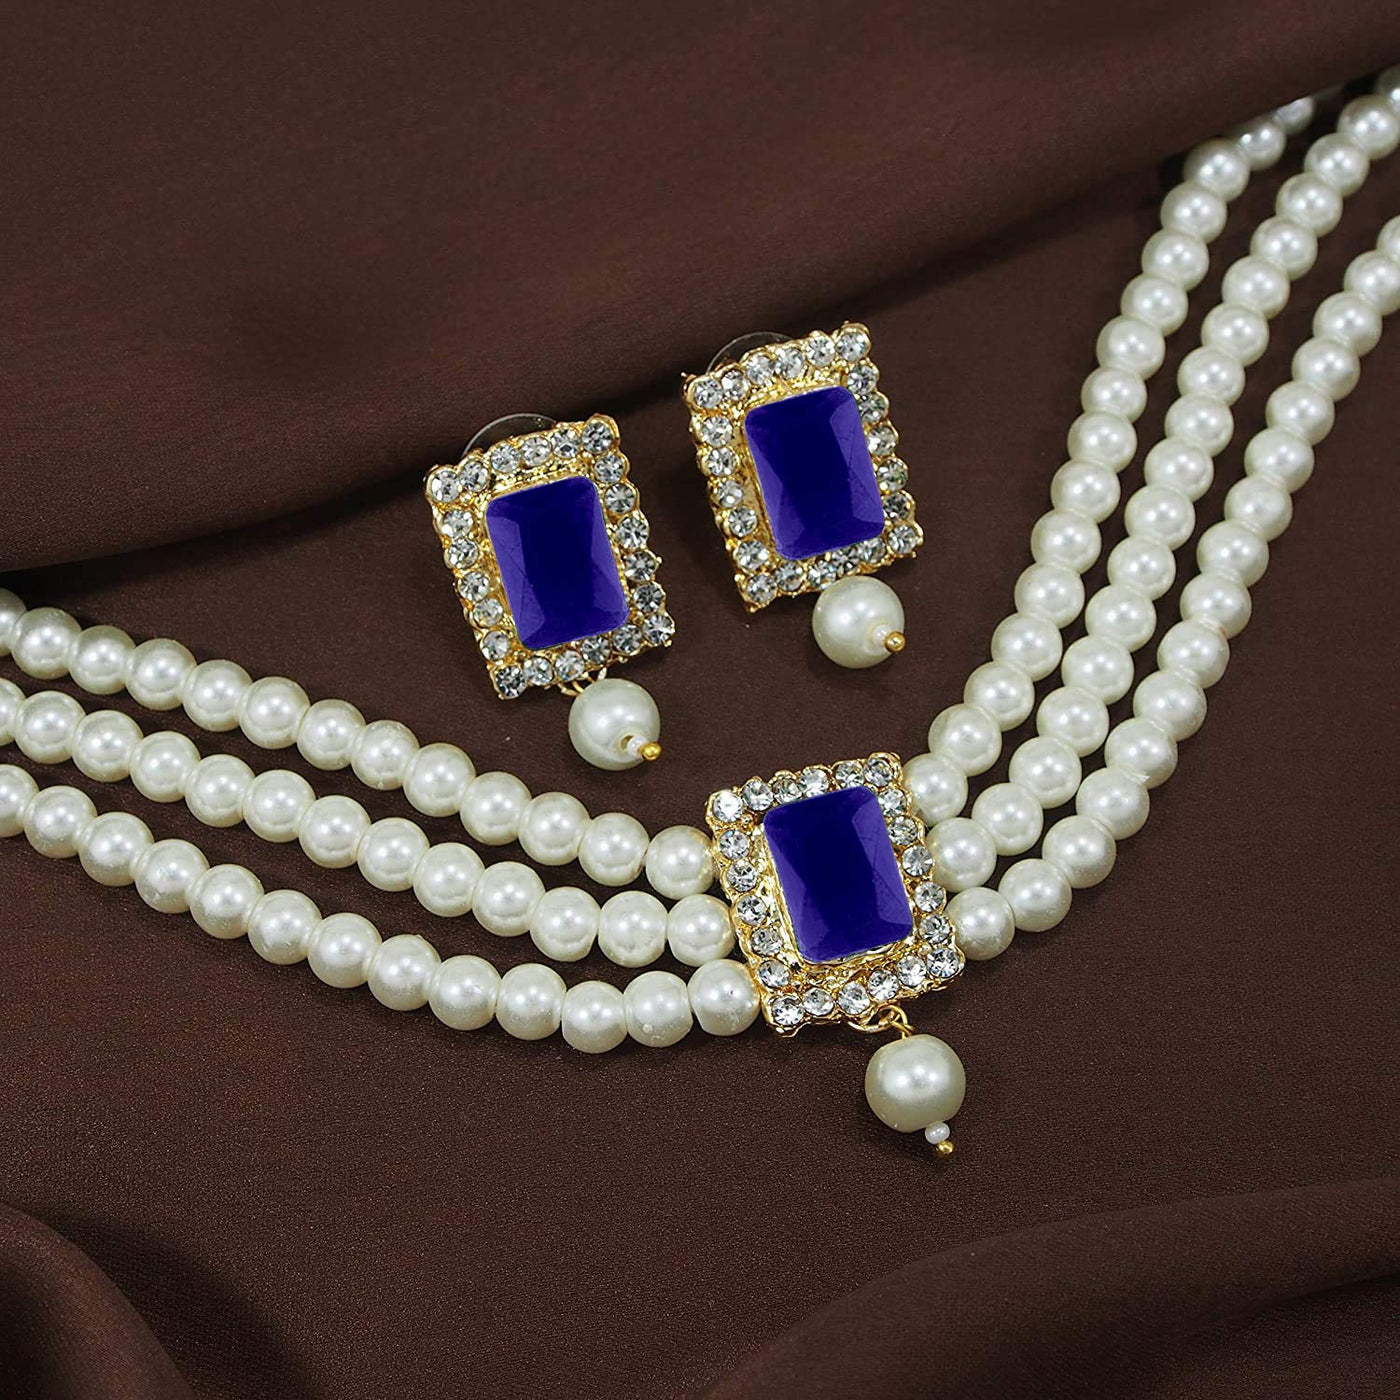 Women's  Gold Plated Handcrafted Sapphire Stone Beaded Choker Necklace Jewellery Set With Earrings  - i jewels